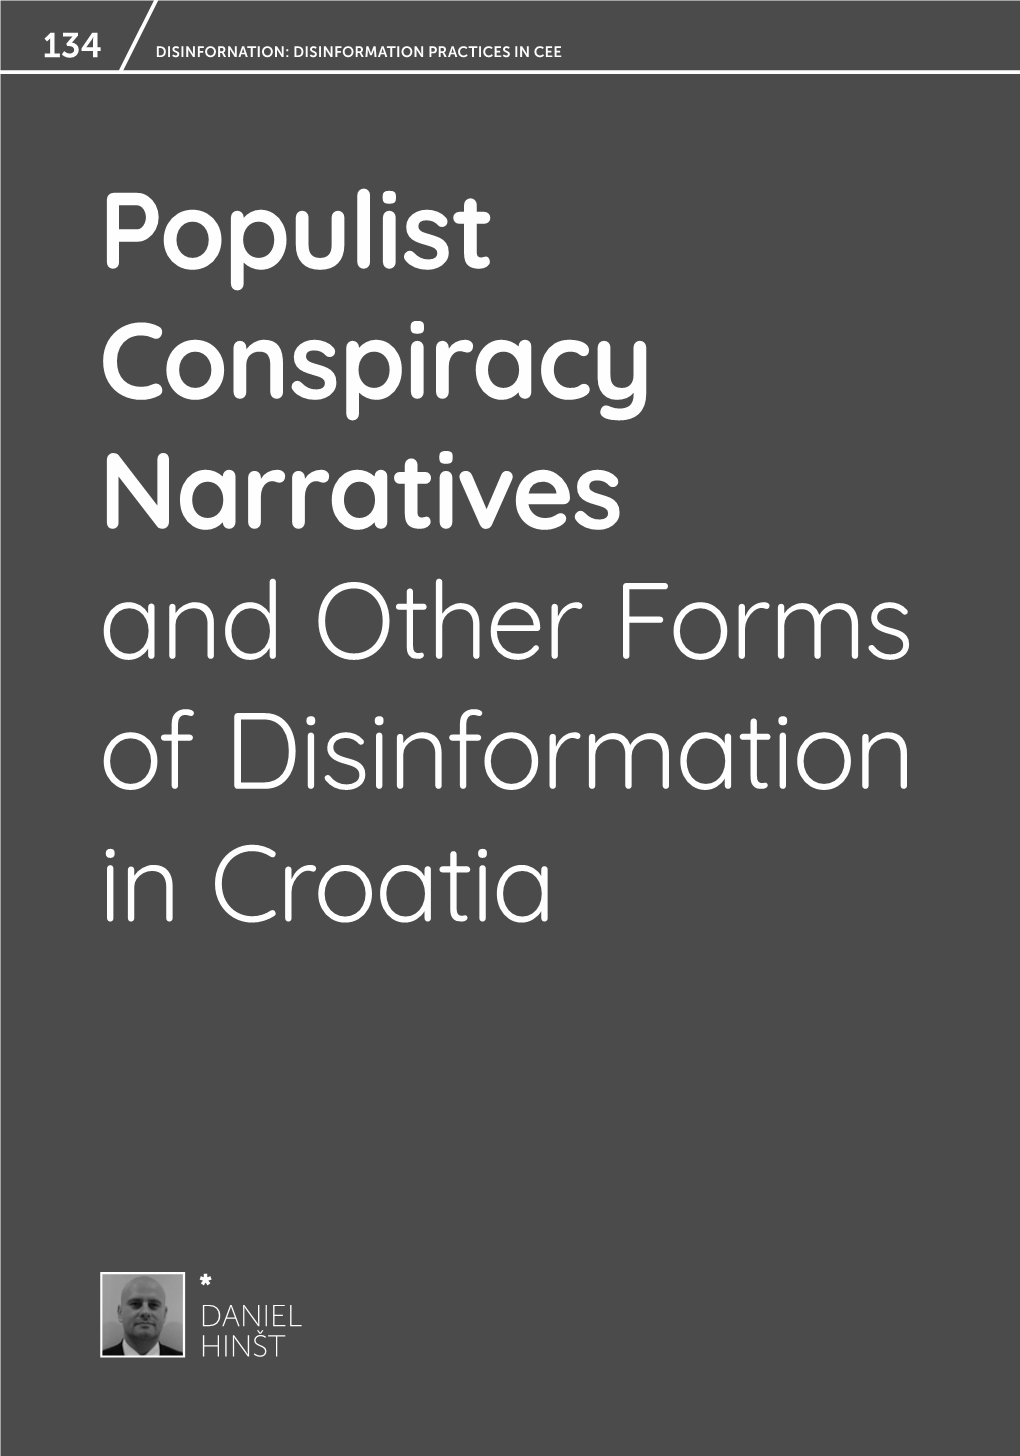 Populist Conspiracy Narratives and Other Forms of Disinformation in Croatia